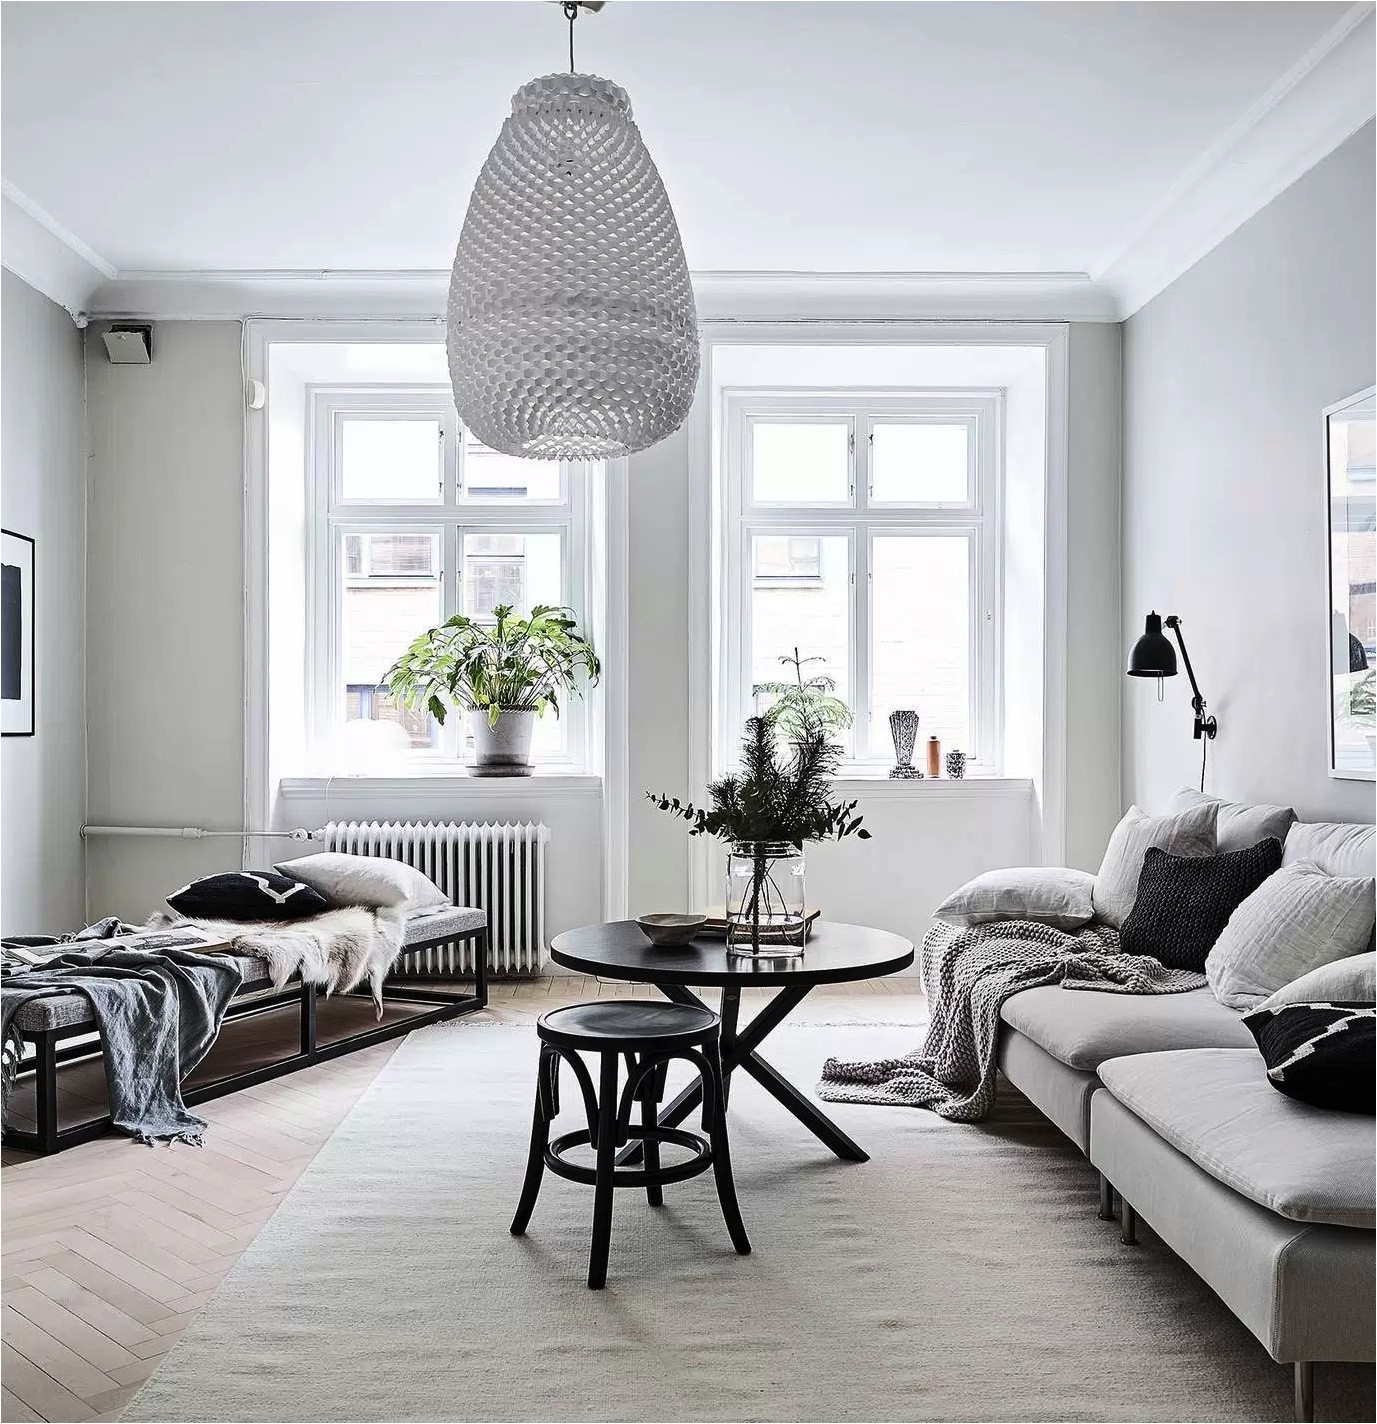 Small Living Room Ideas Pinterest
 8 clever small living room ideas with Scandi style DIY